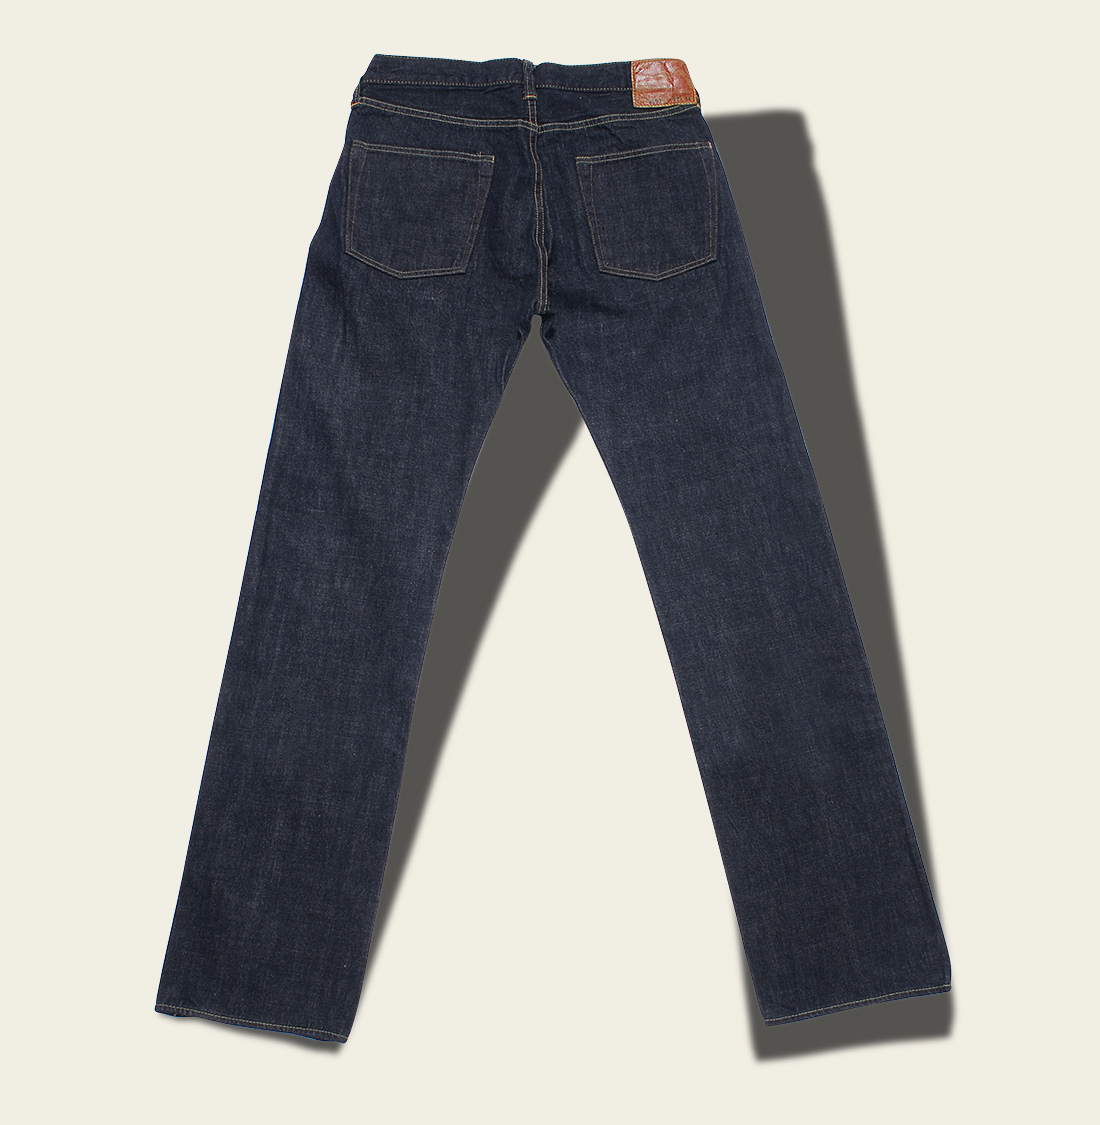 Sugar Cane Type II 1947 Selvage-Denim Jeans SC42009A | History Preservation